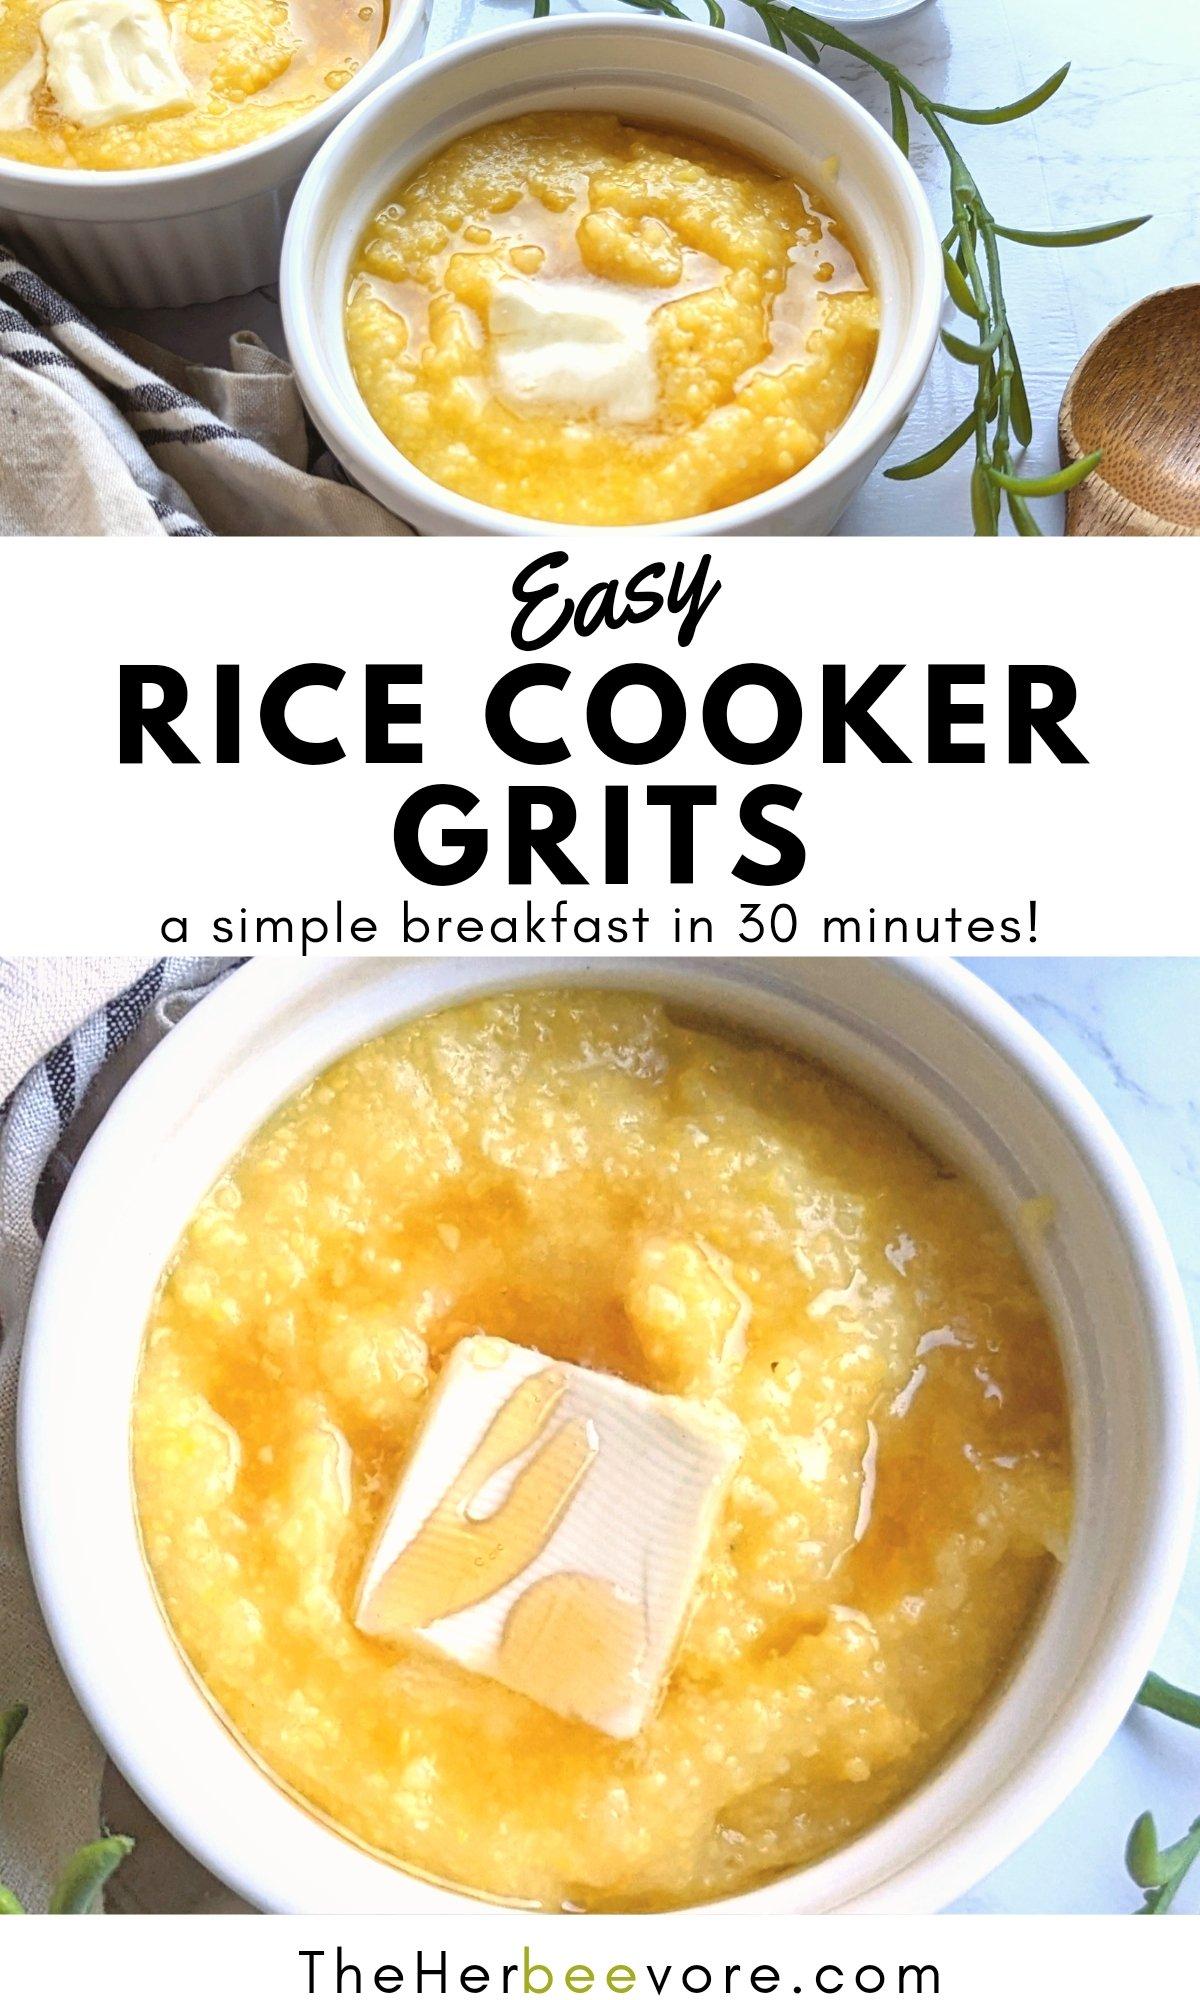 rice cooker grits recipe healthy gluten free breakfasts with corn meal rice cooker recipes